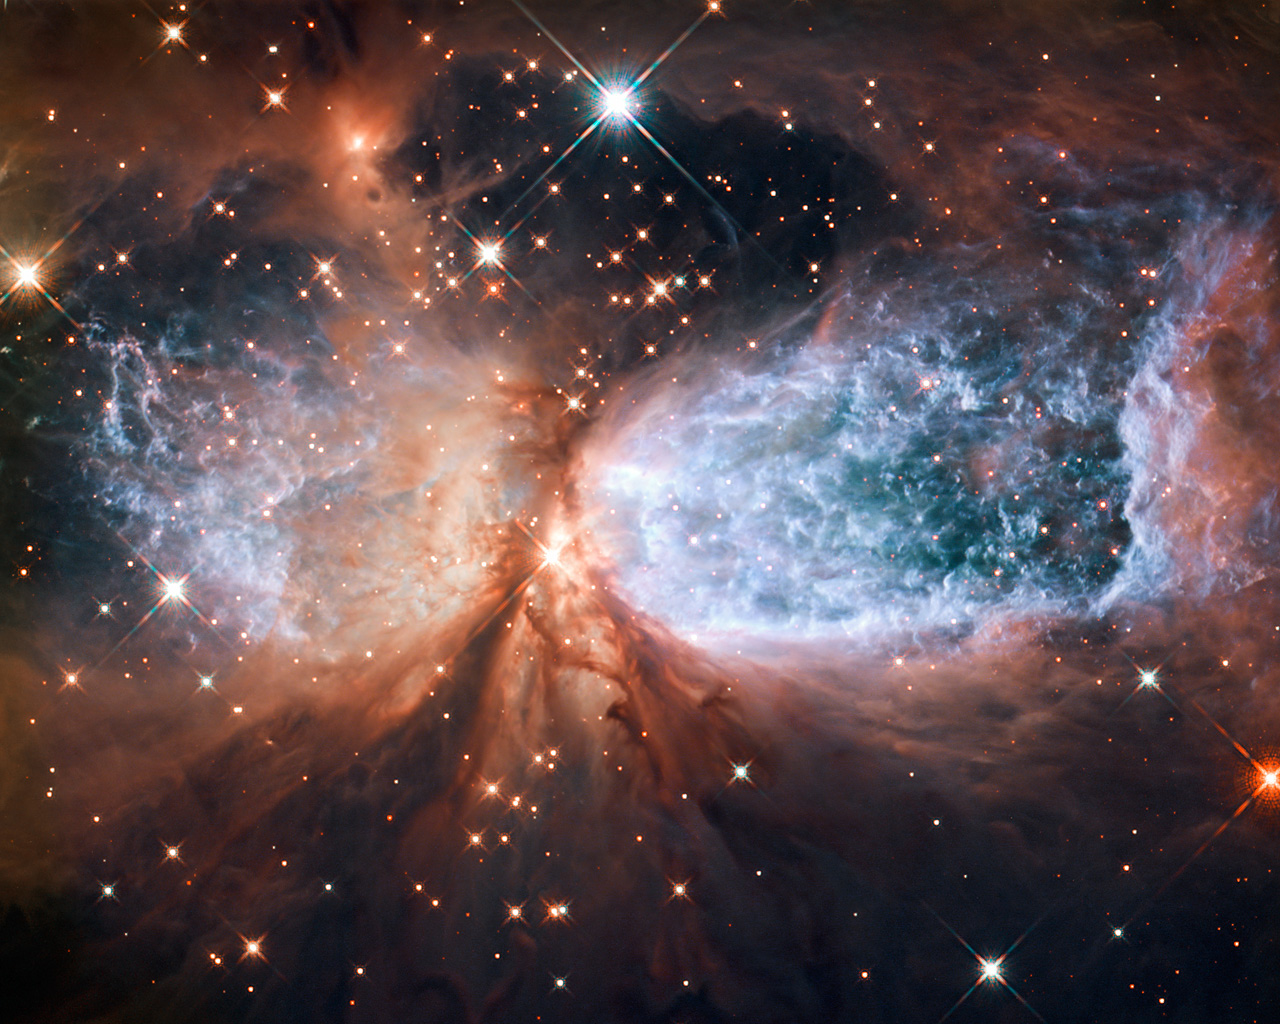 This image from the NASA/ESA Hubble Space Telescope shows Sh 2-106, or S106 for short. This is a compact star forming region in the constellation Cygnus (The Swan). A newly-formed star called S106 IR is shrouded in dust at the centre of the image, and is responsible for the surrounding gas cloud’s hourglass-like shape and the turbulence visible within. Light from glowing hydrogen is coloured blue in this image.